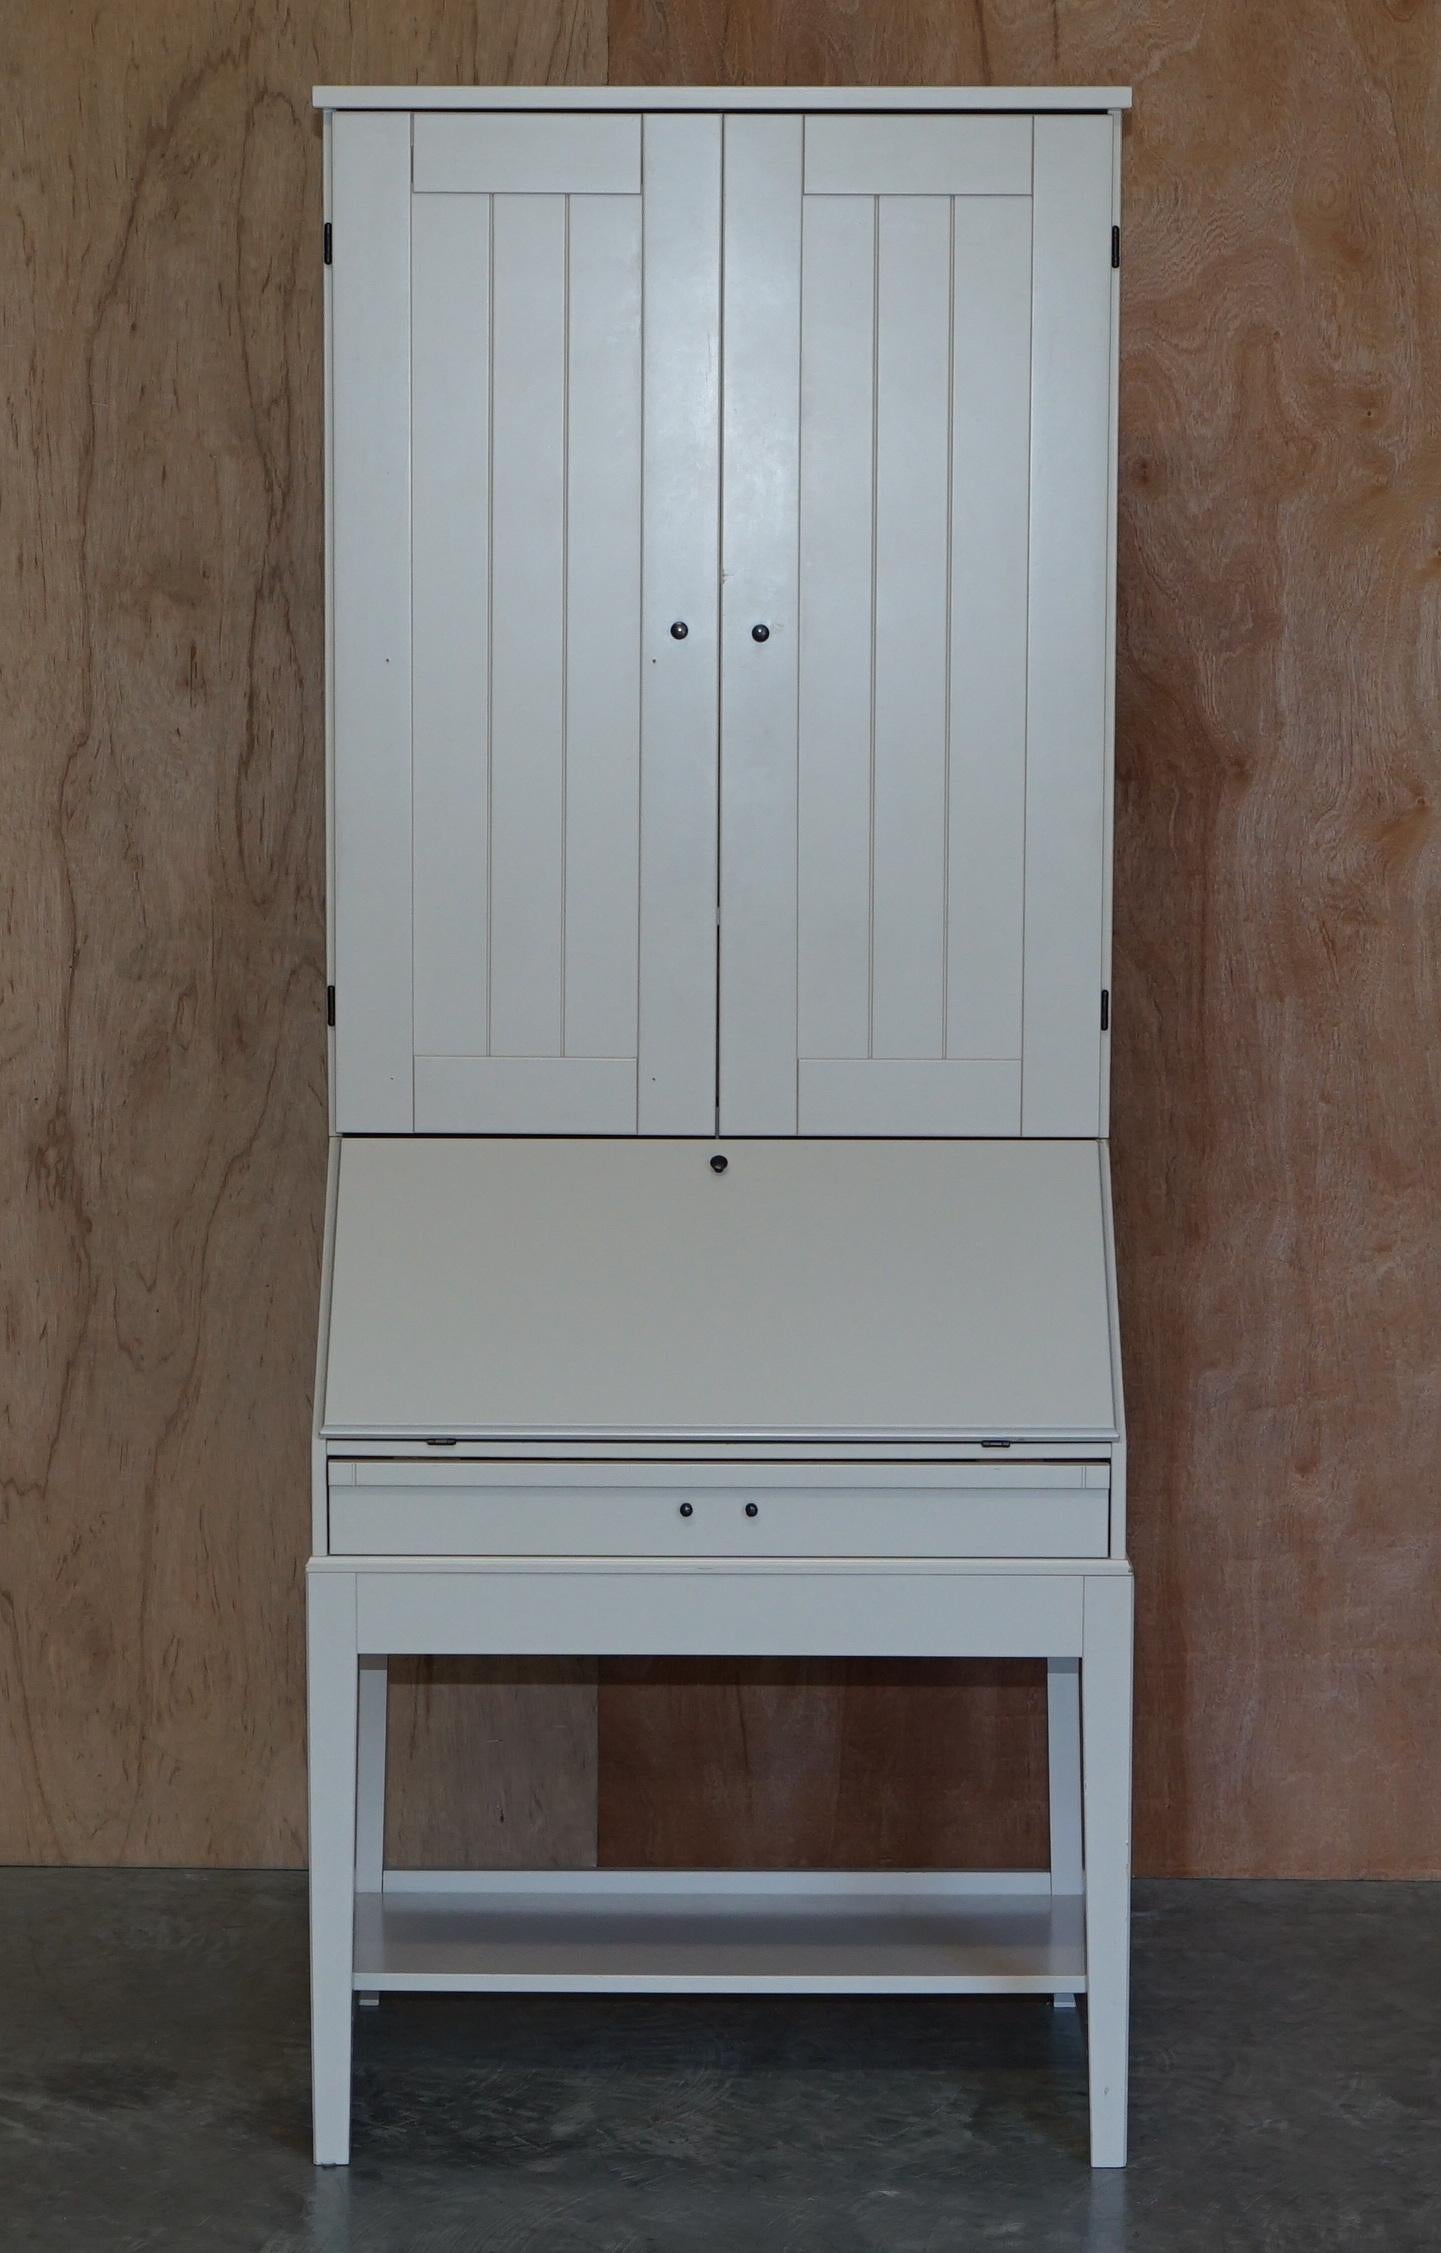 We are delighted to offer this nice utilitarian free standing white bookcase with writing bureau base. 

My wife purchased this a few years ago for our daughters bedroom, she used the top section for storing books and the base as a work station.